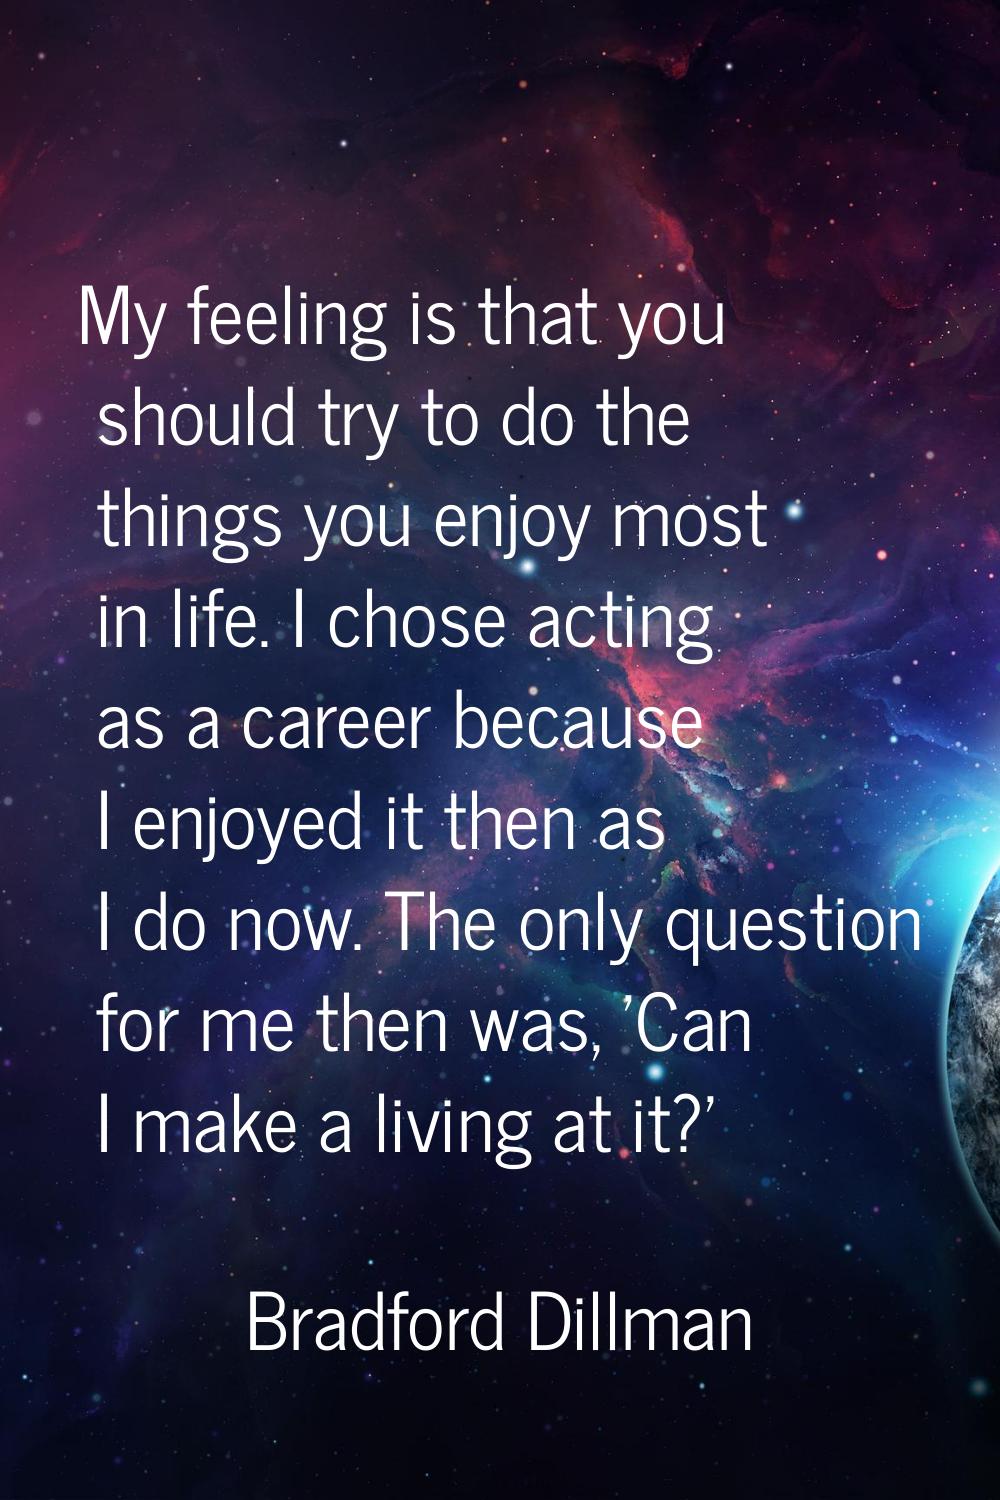 My feeling is that you should try to do the things you enjoy most in life. I chose acting as a care